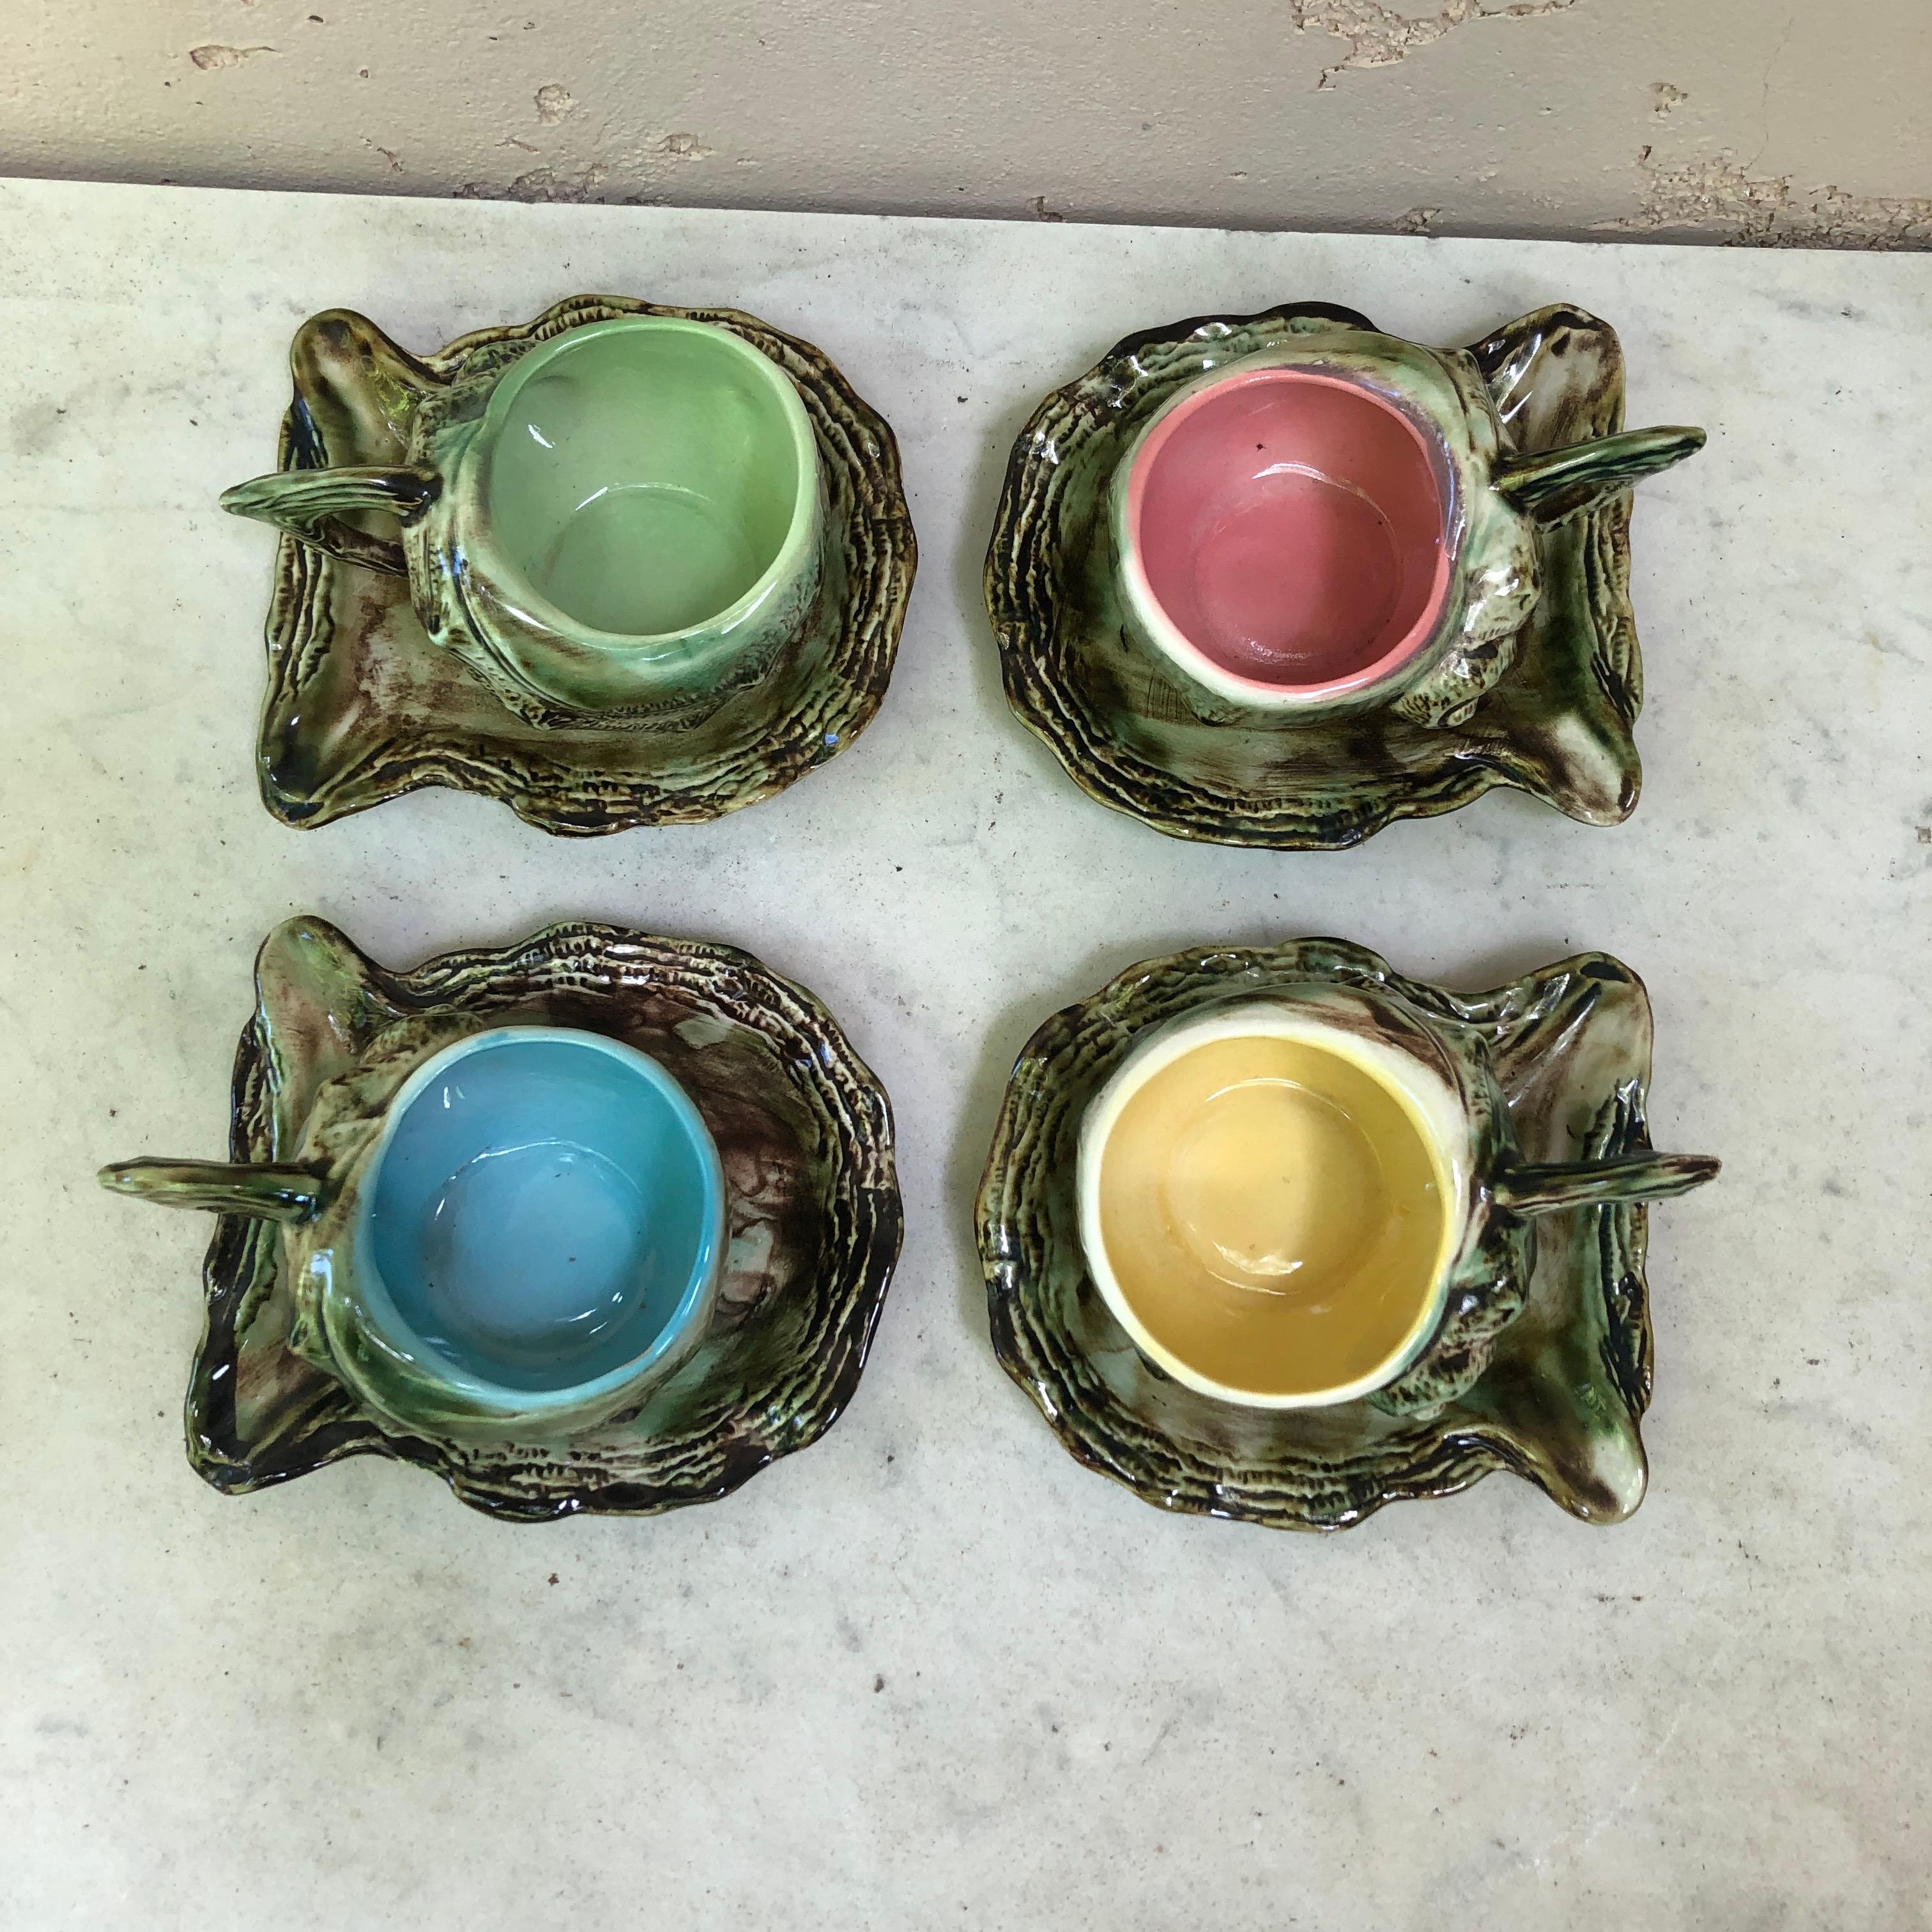 Set of 4 Majolica Shell cups & saucers Circa 1950.
All different colors inside.
Saucers / 5.2 by 4.2 inches
Cups / 4.5 by 3 inches.